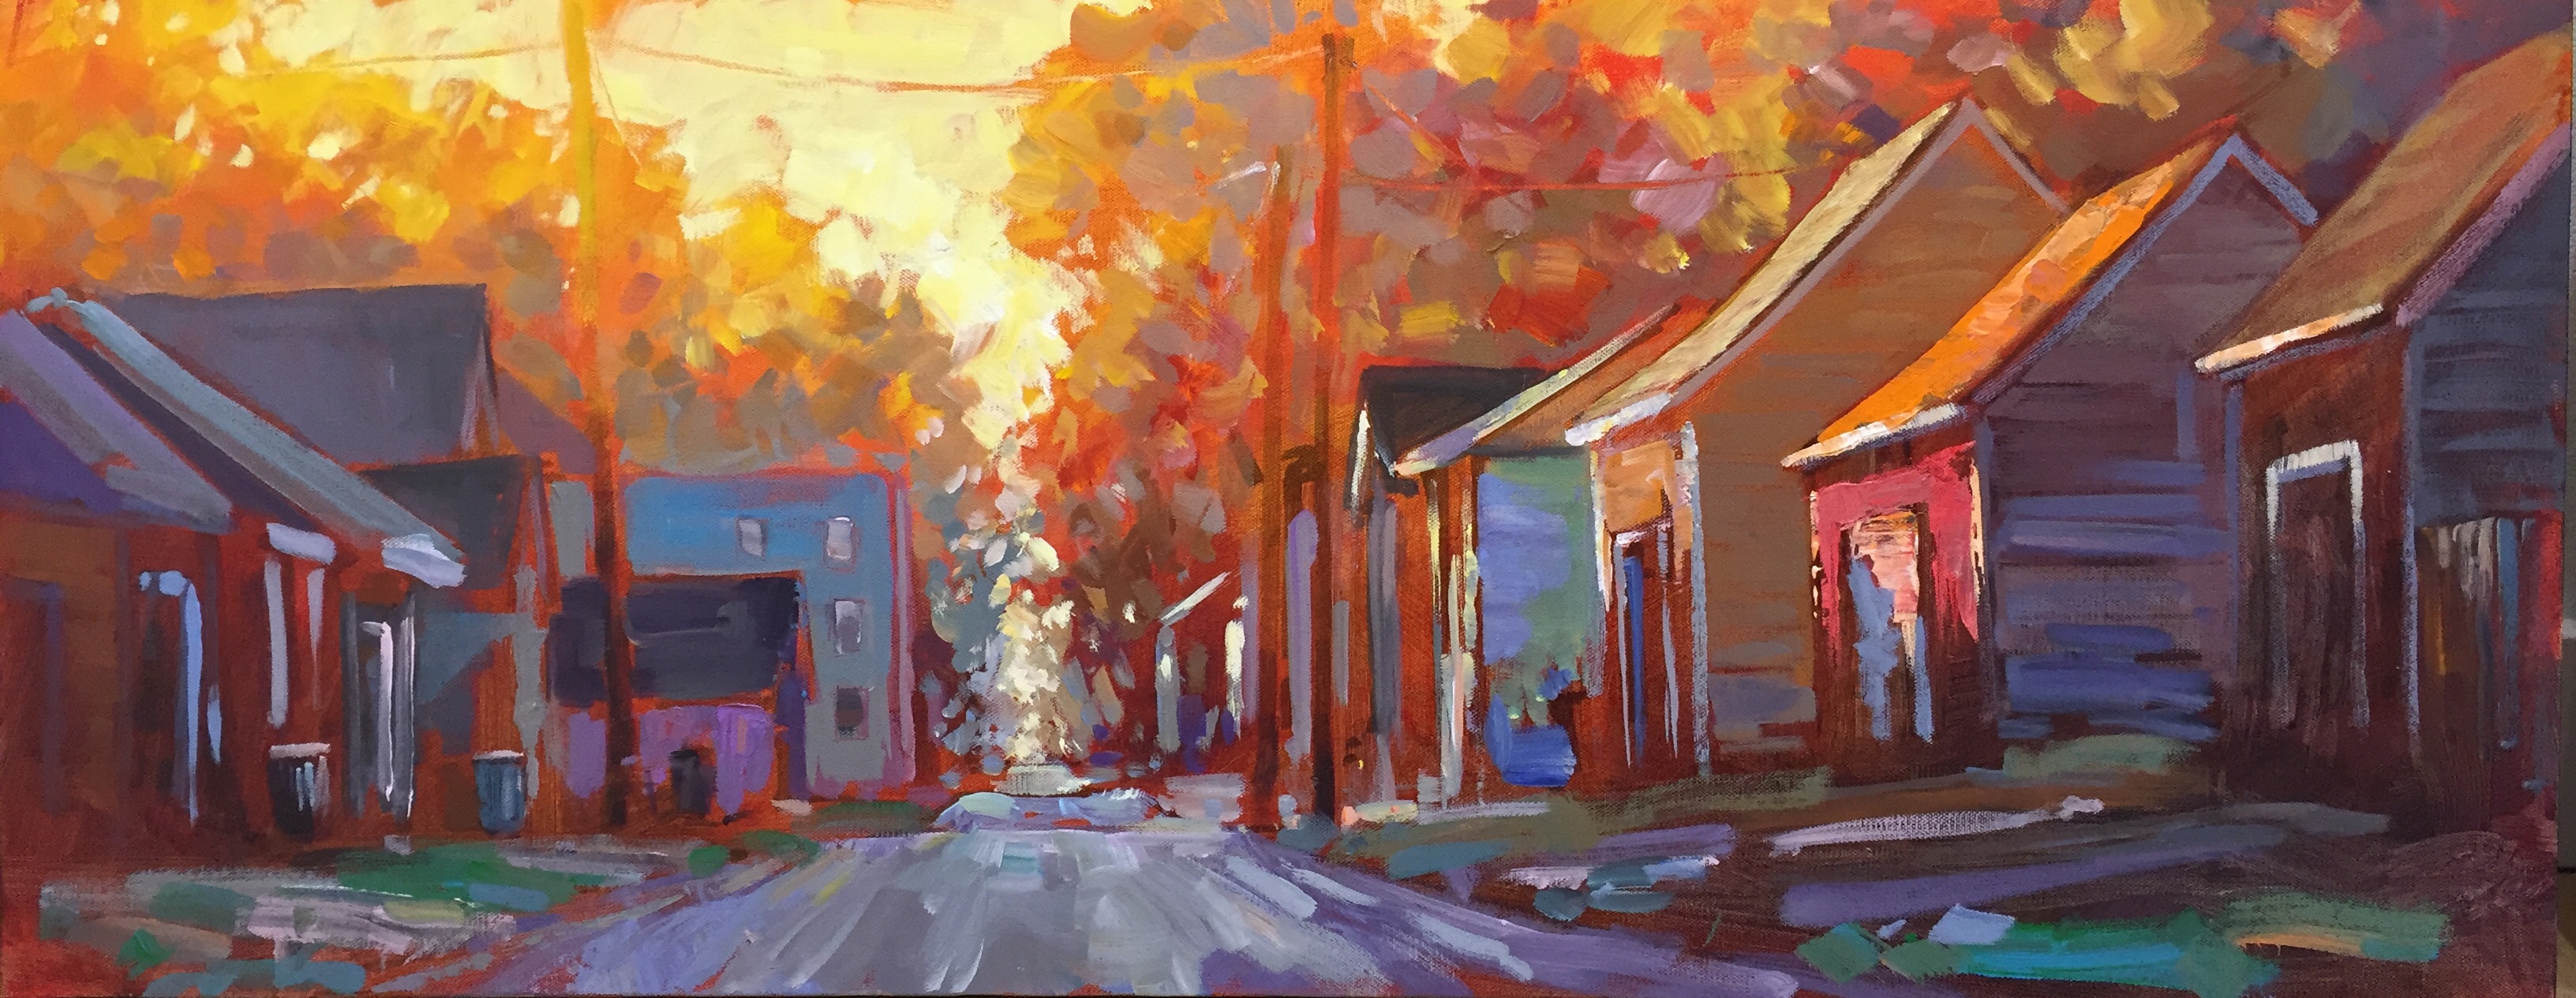 Online Gallery – “Home: Places of the Heart” –  featuring new art by Jed Dorsey